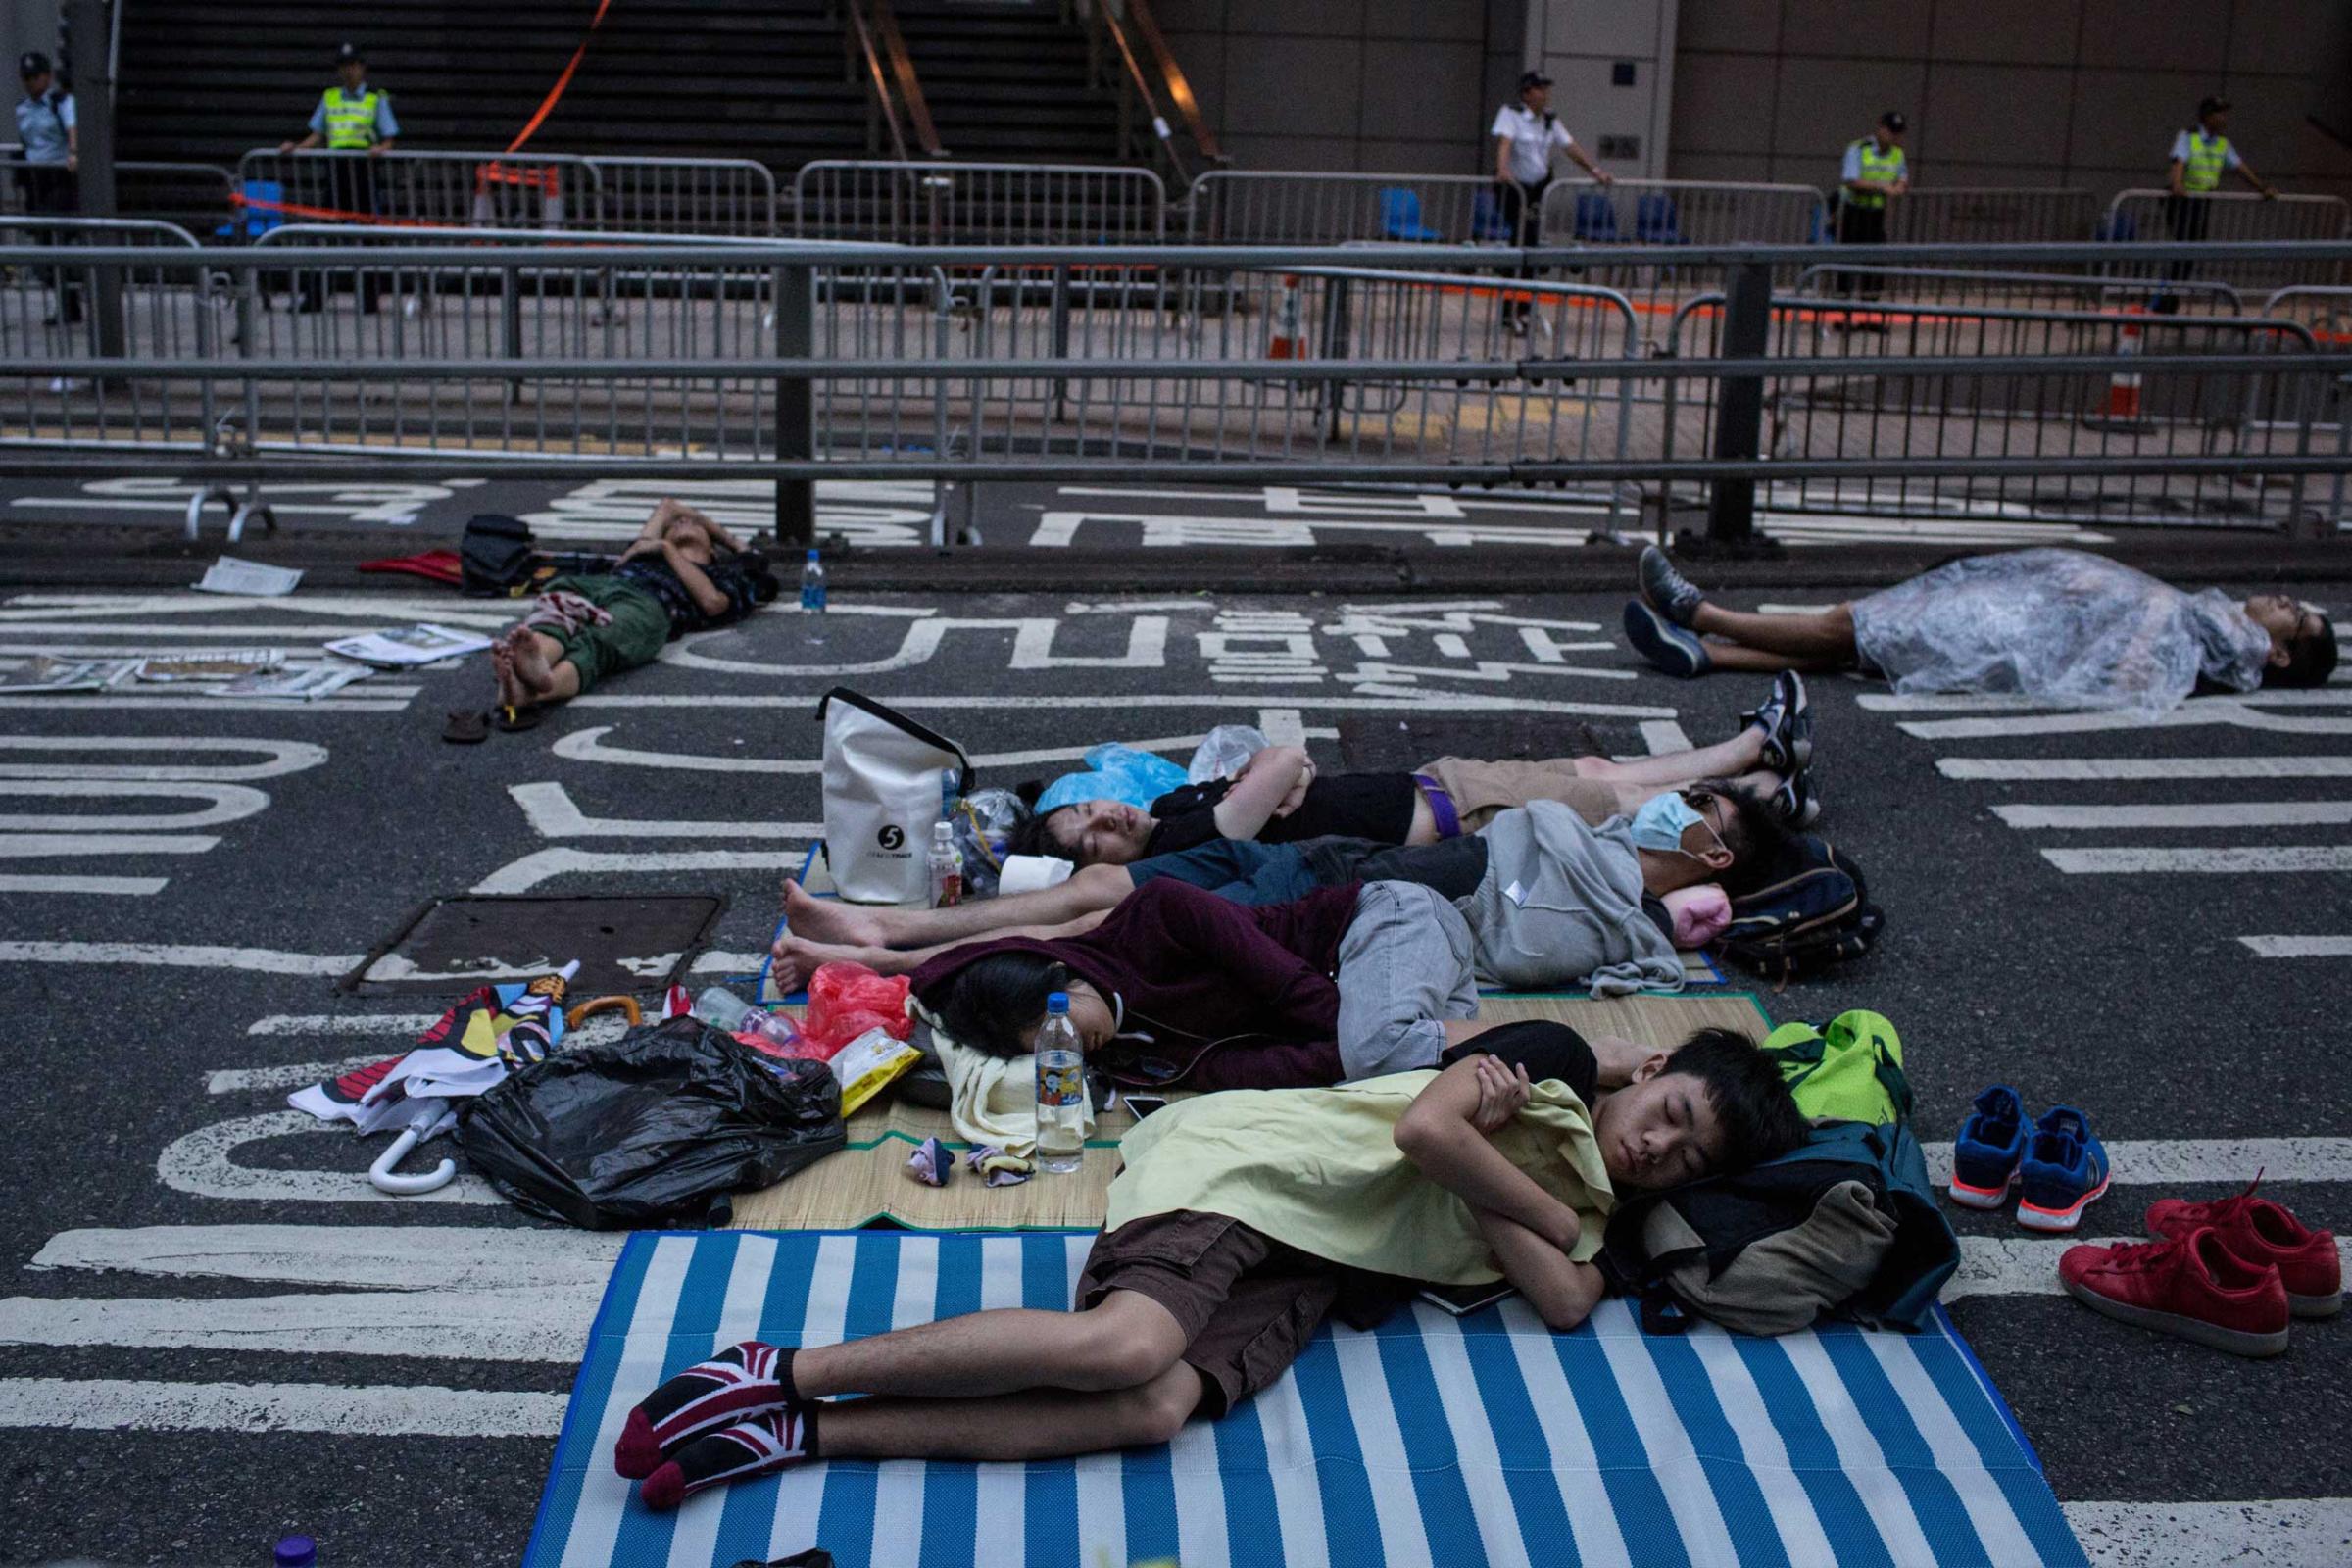 Protesters sleep on the road outside the Police Headquarters building on Oct. 2, 2014 in Hong Kong, Hong Kong.